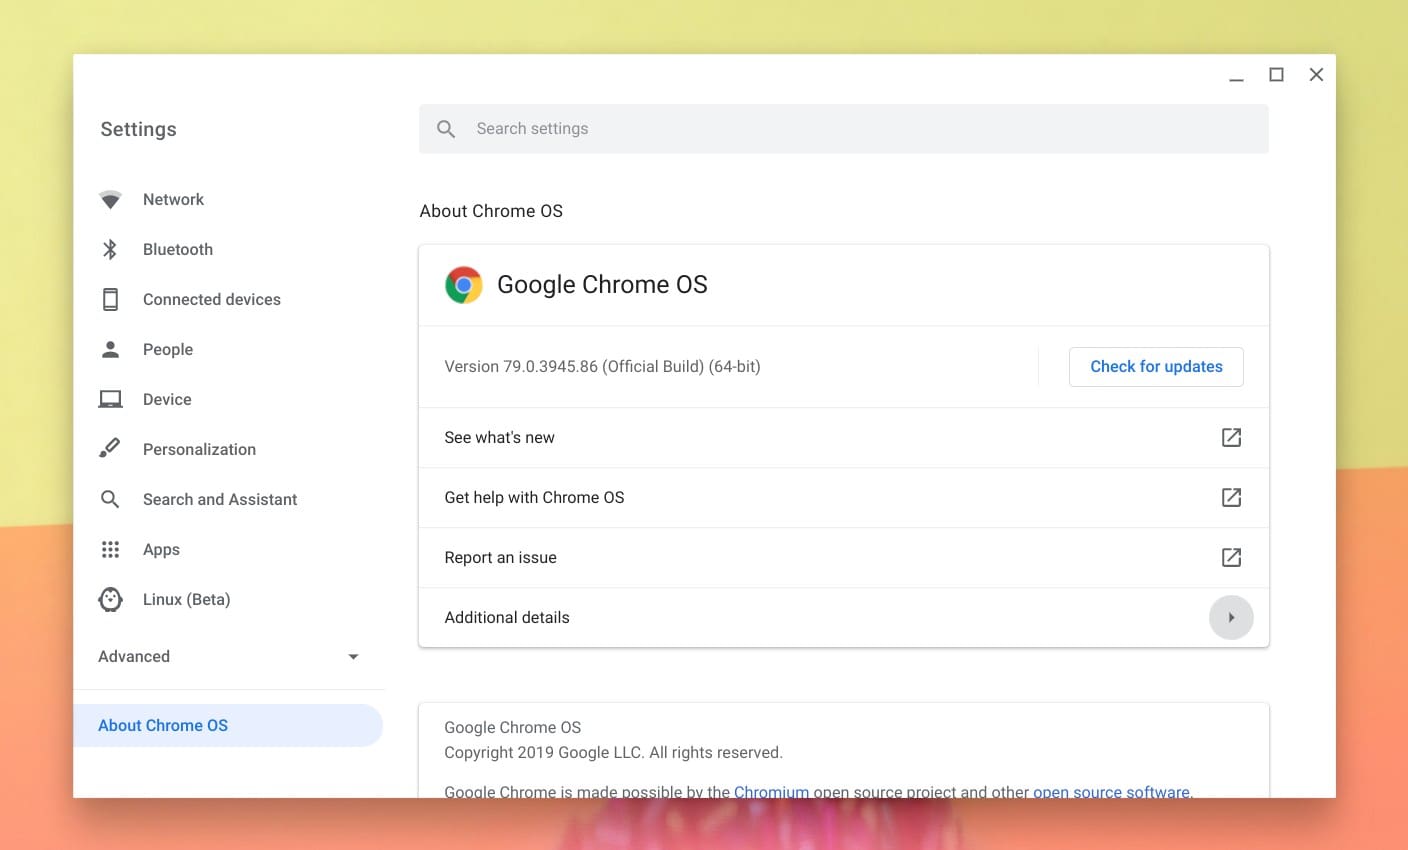 Settings - About Chrome OS